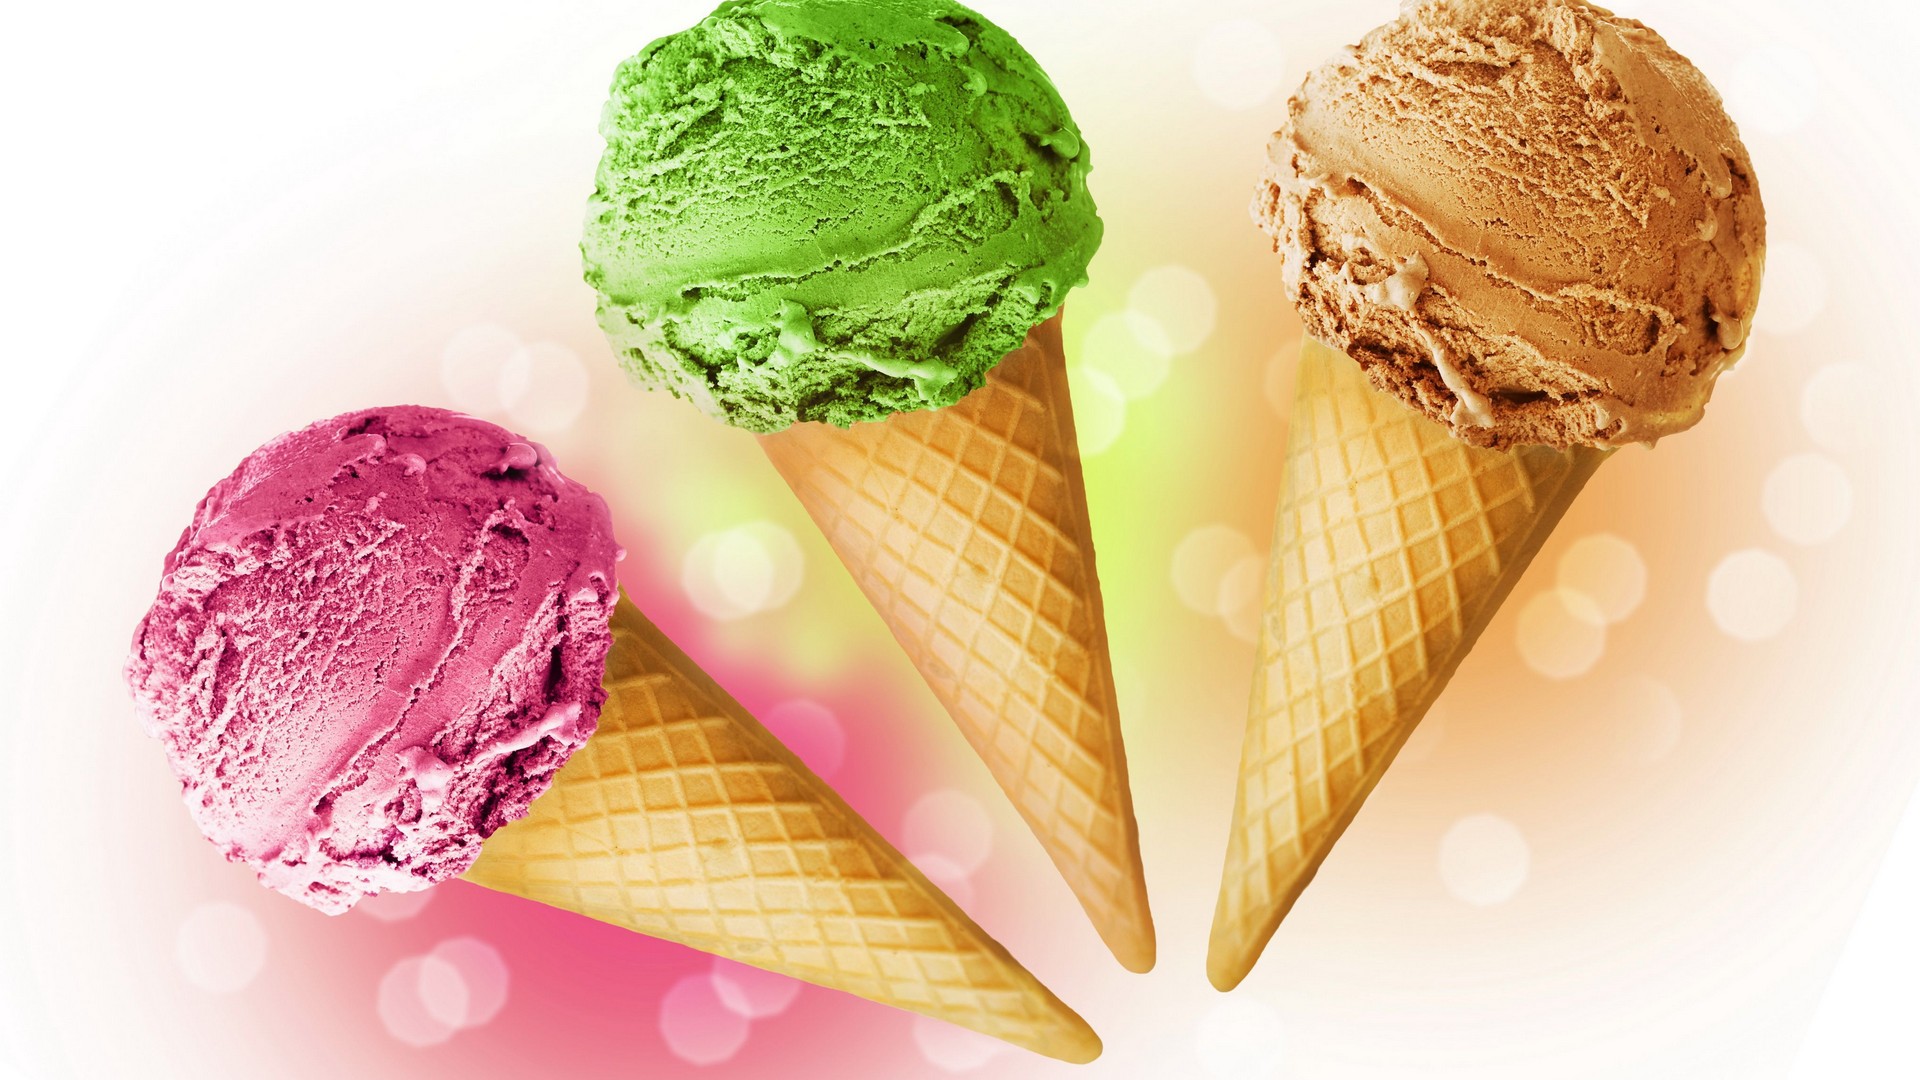 Wallpaper Ice Cream Cone Desktop with high-resolution 1920x1080 pixel. You can use this wallpaper for your Windows and Mac OS computers as well as your Android and iPhone smartphones